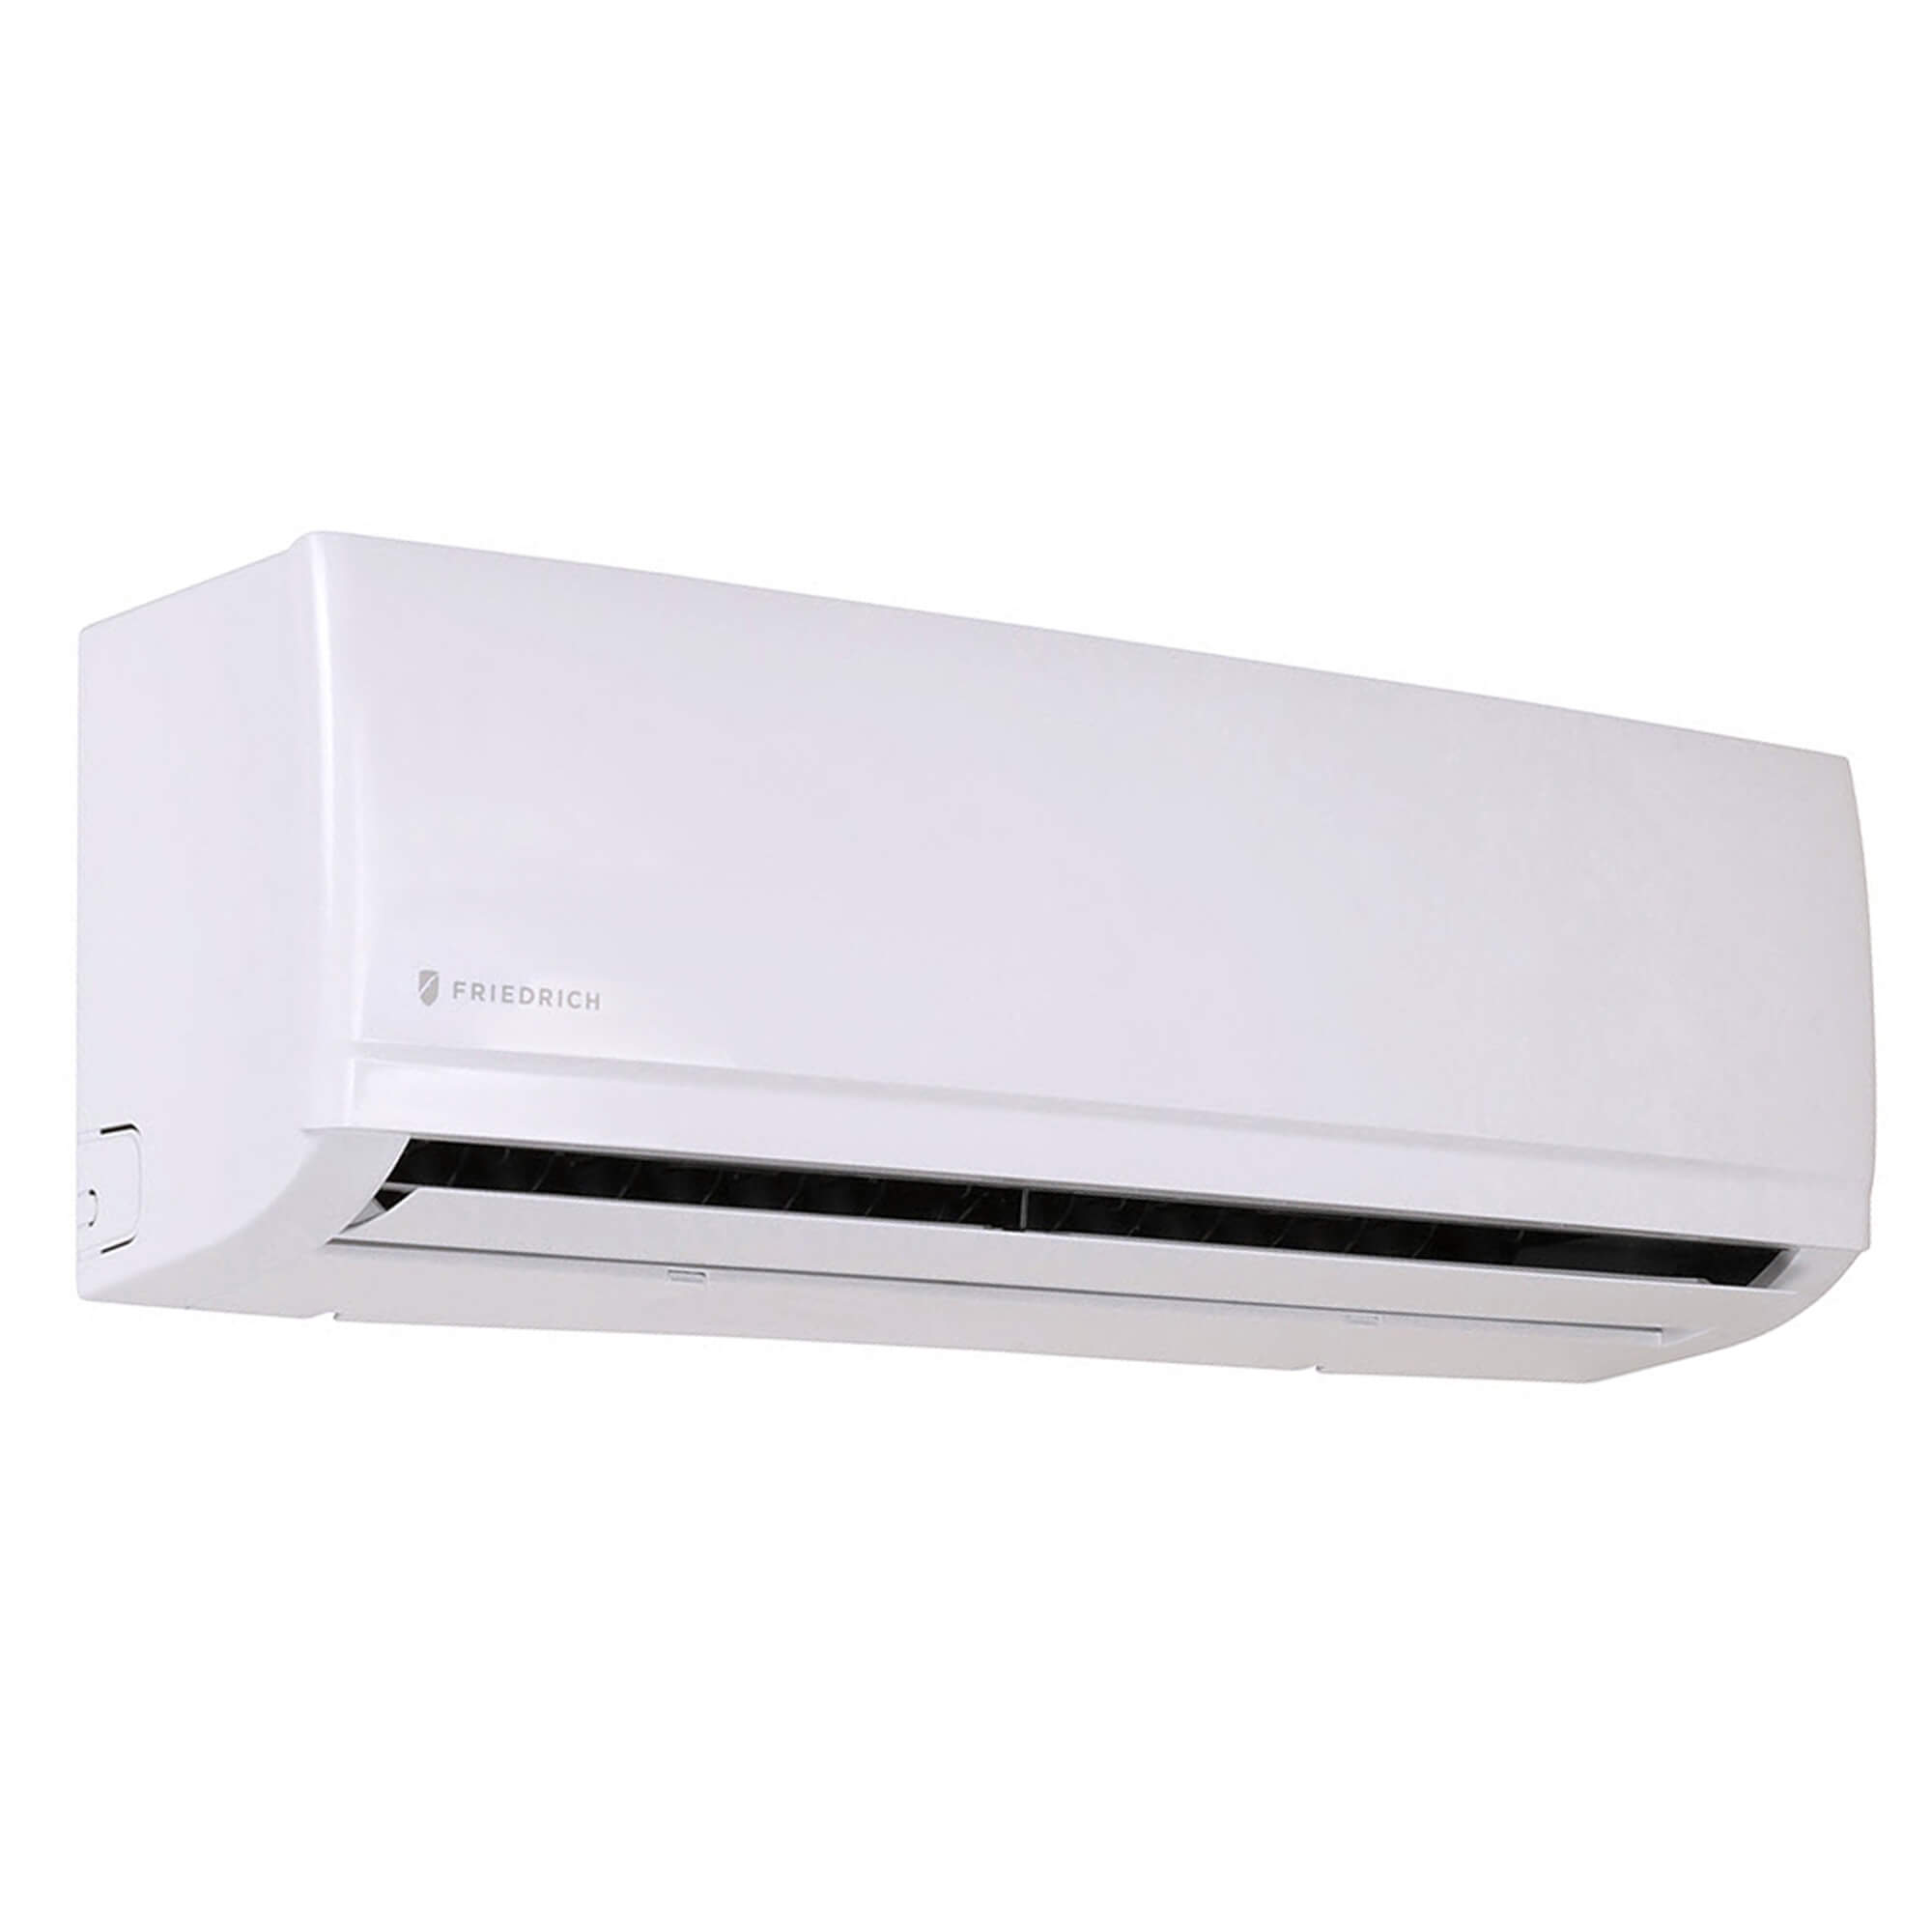 single room air conditioning units